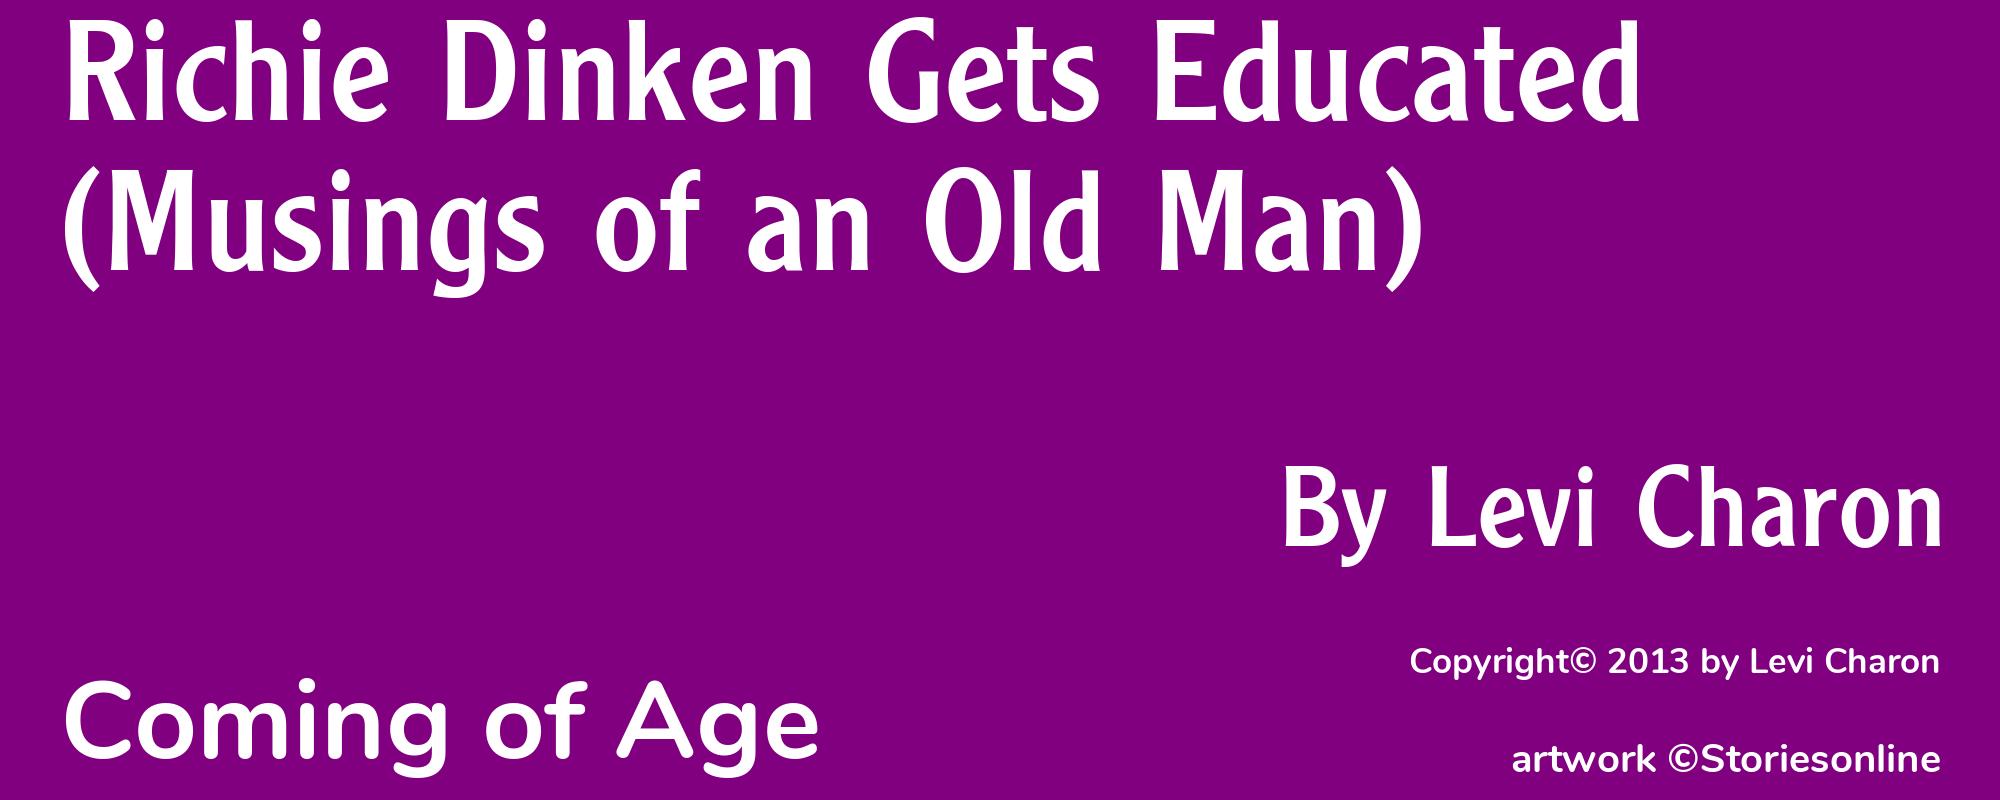 Richie Dinken Gets Educated (Musings of an Old Man) - Cover